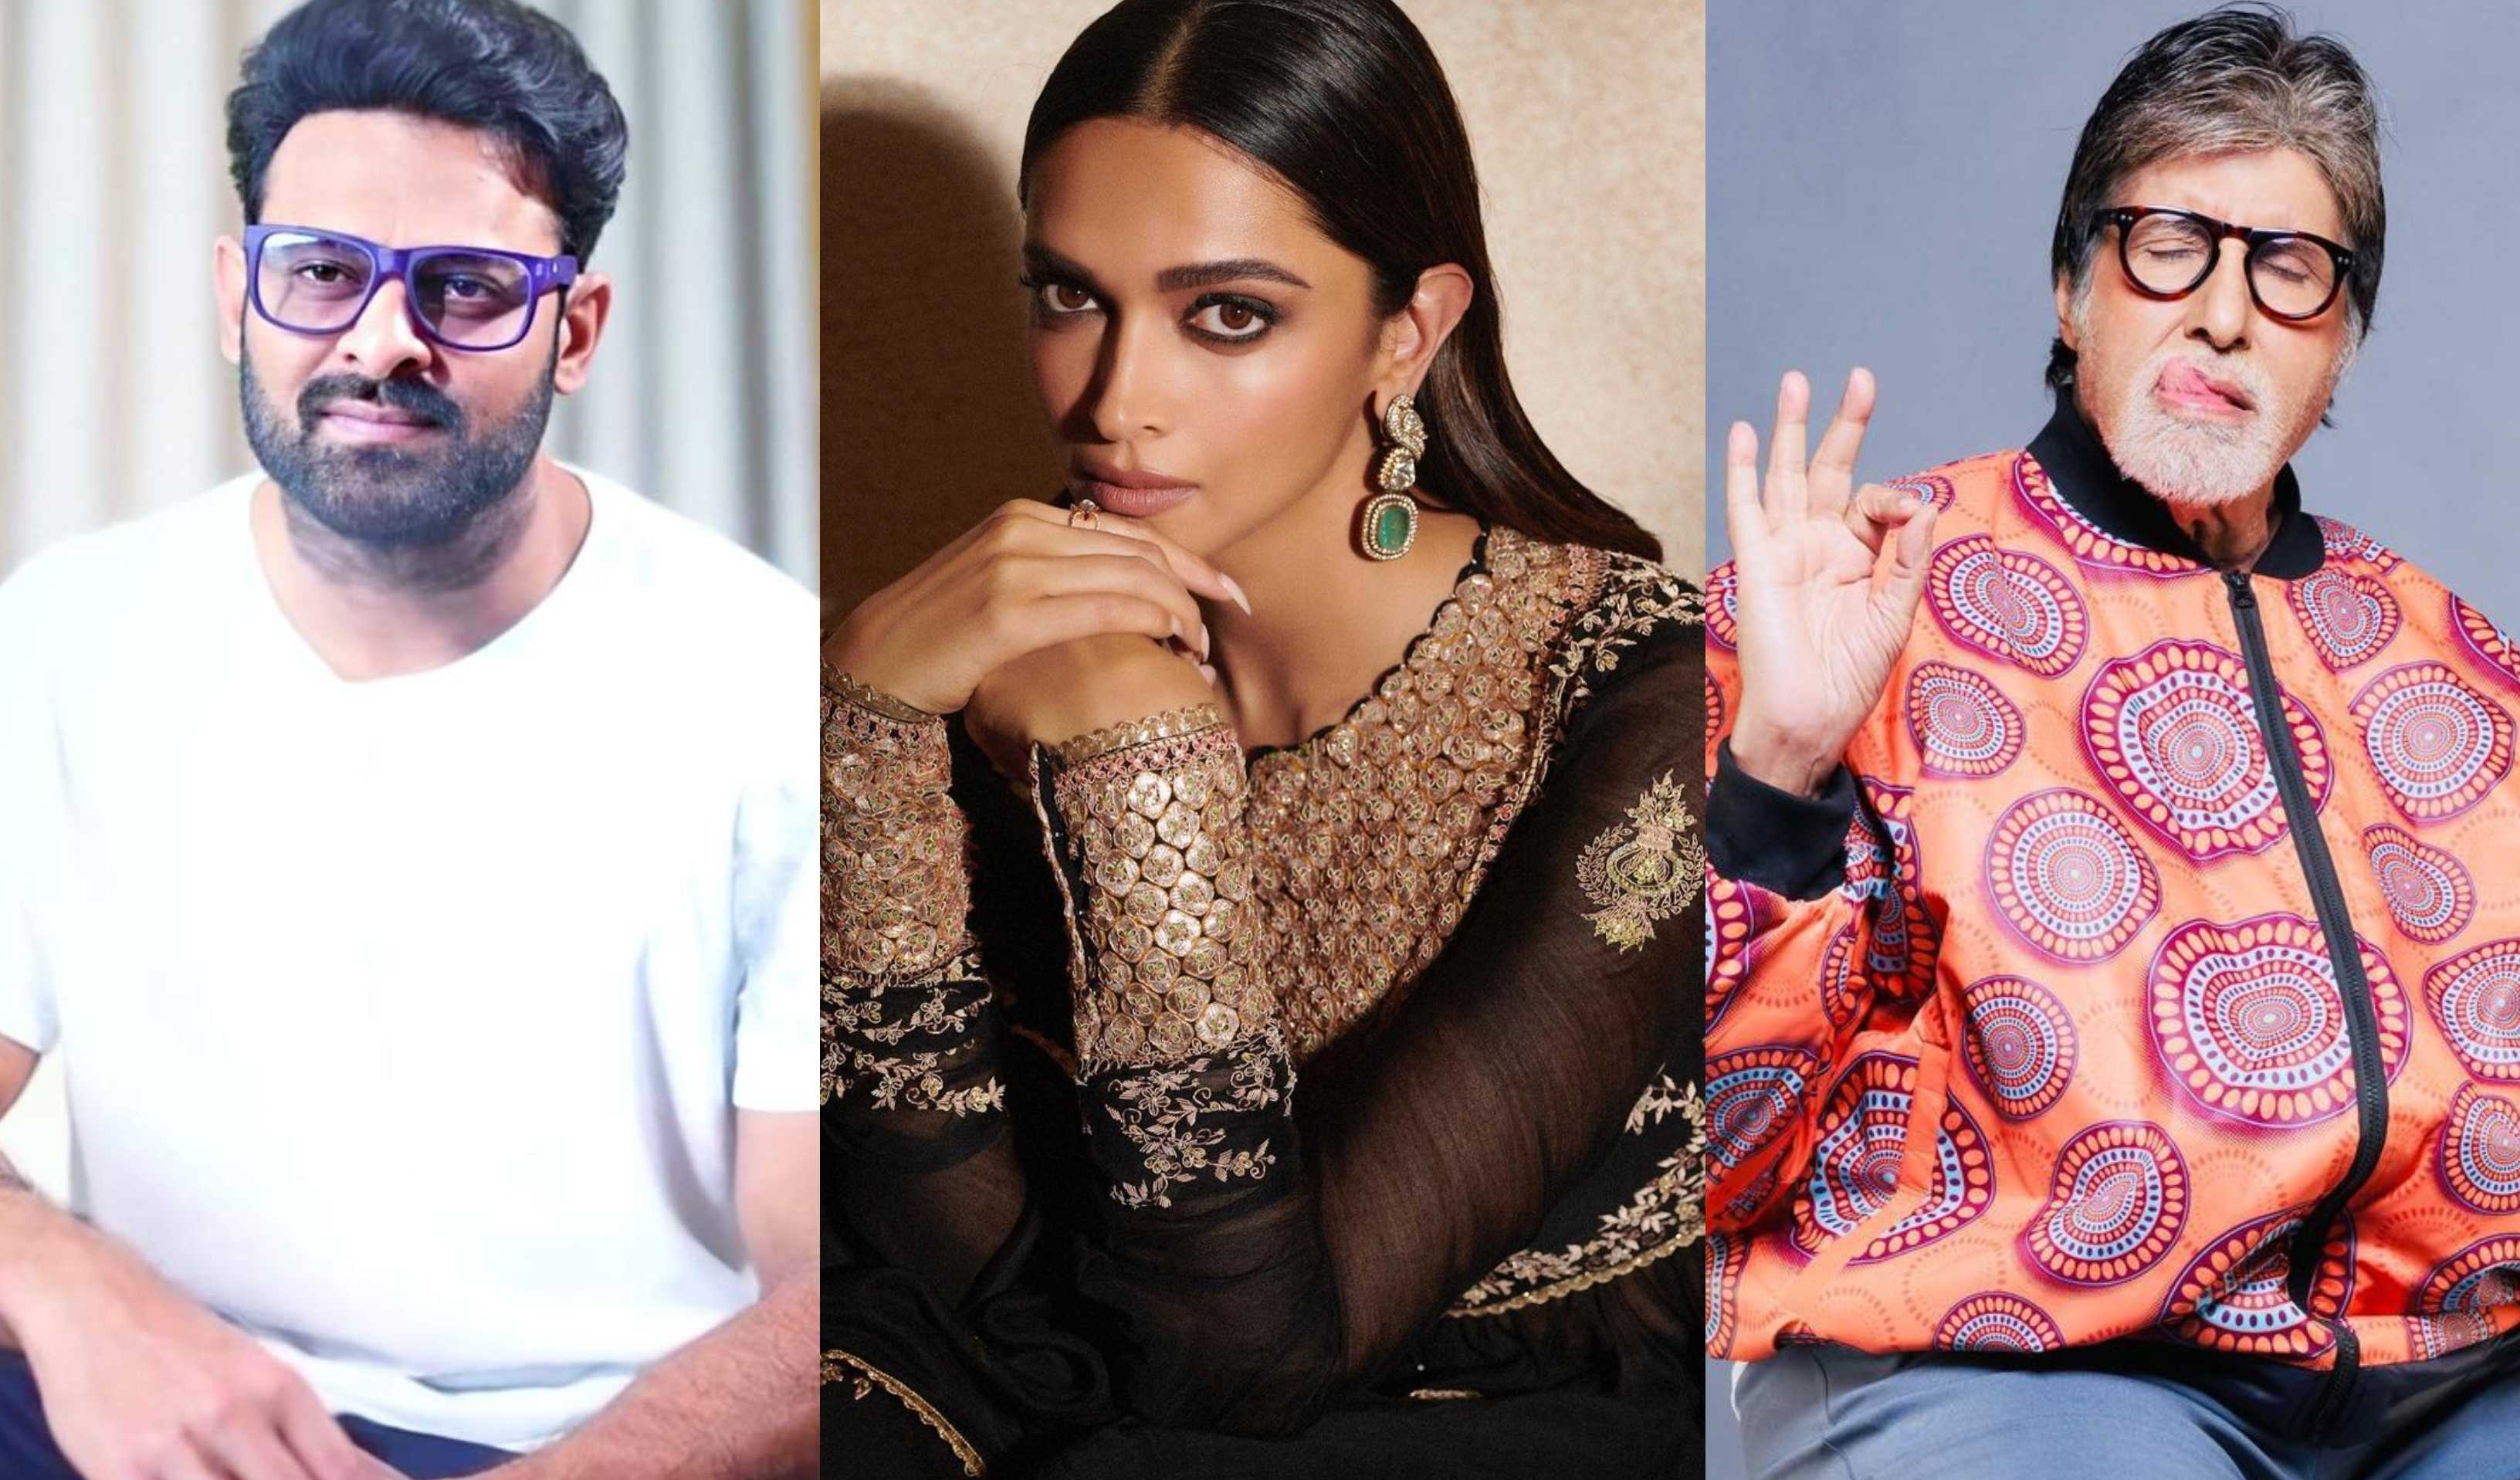 From Prabhas and Amitabh Bachchan to Deepika Padukone: A look at the whopping fees Project K stars are taking home